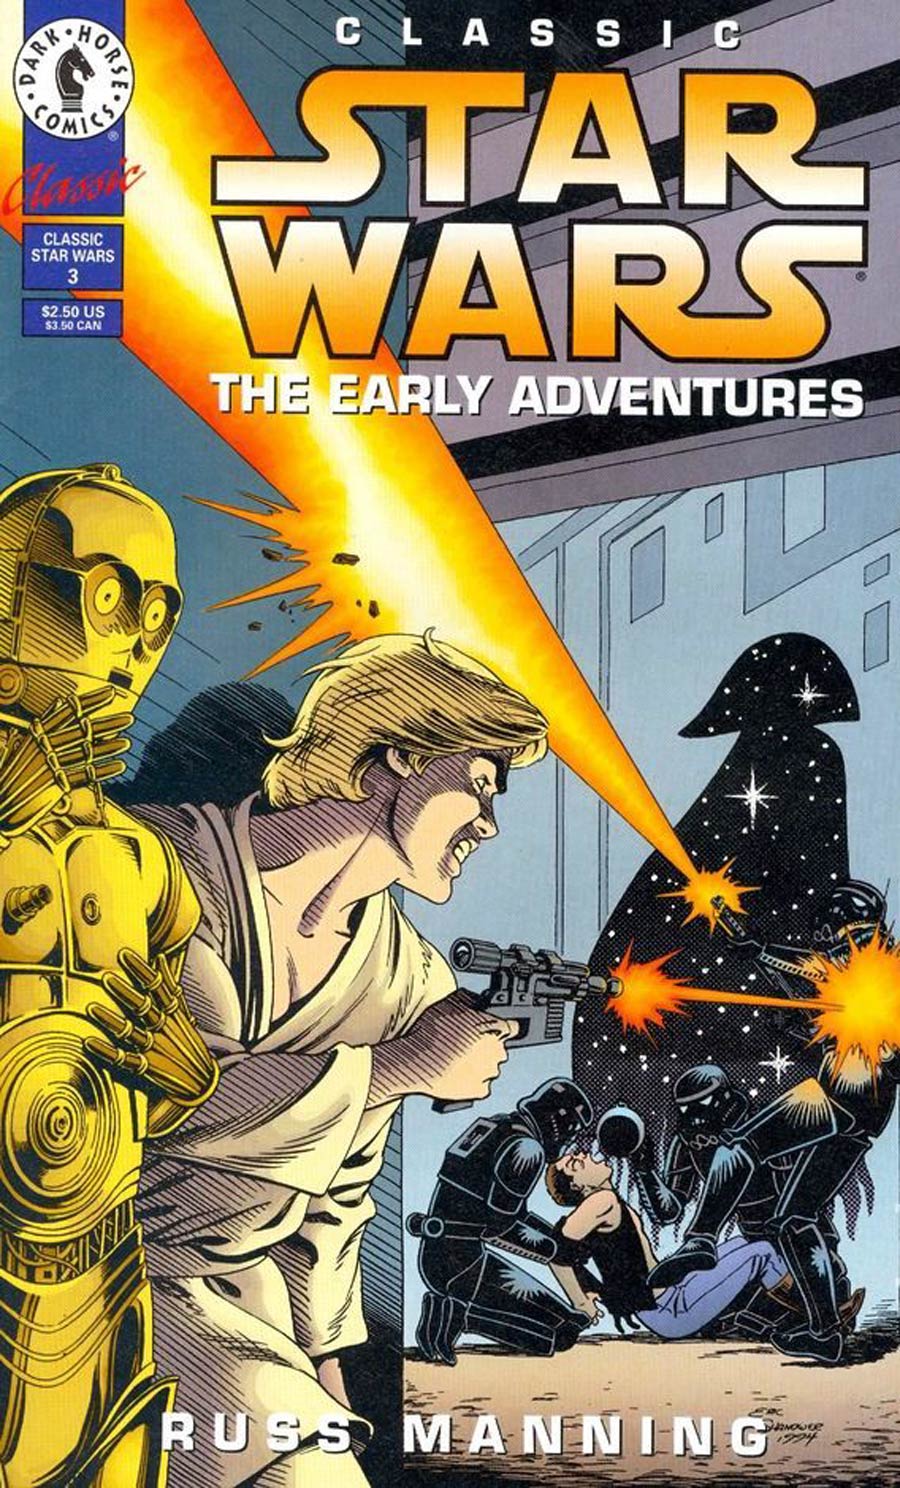 Classic Star Wars The Early Adventures #3 Cover B Without Polybag